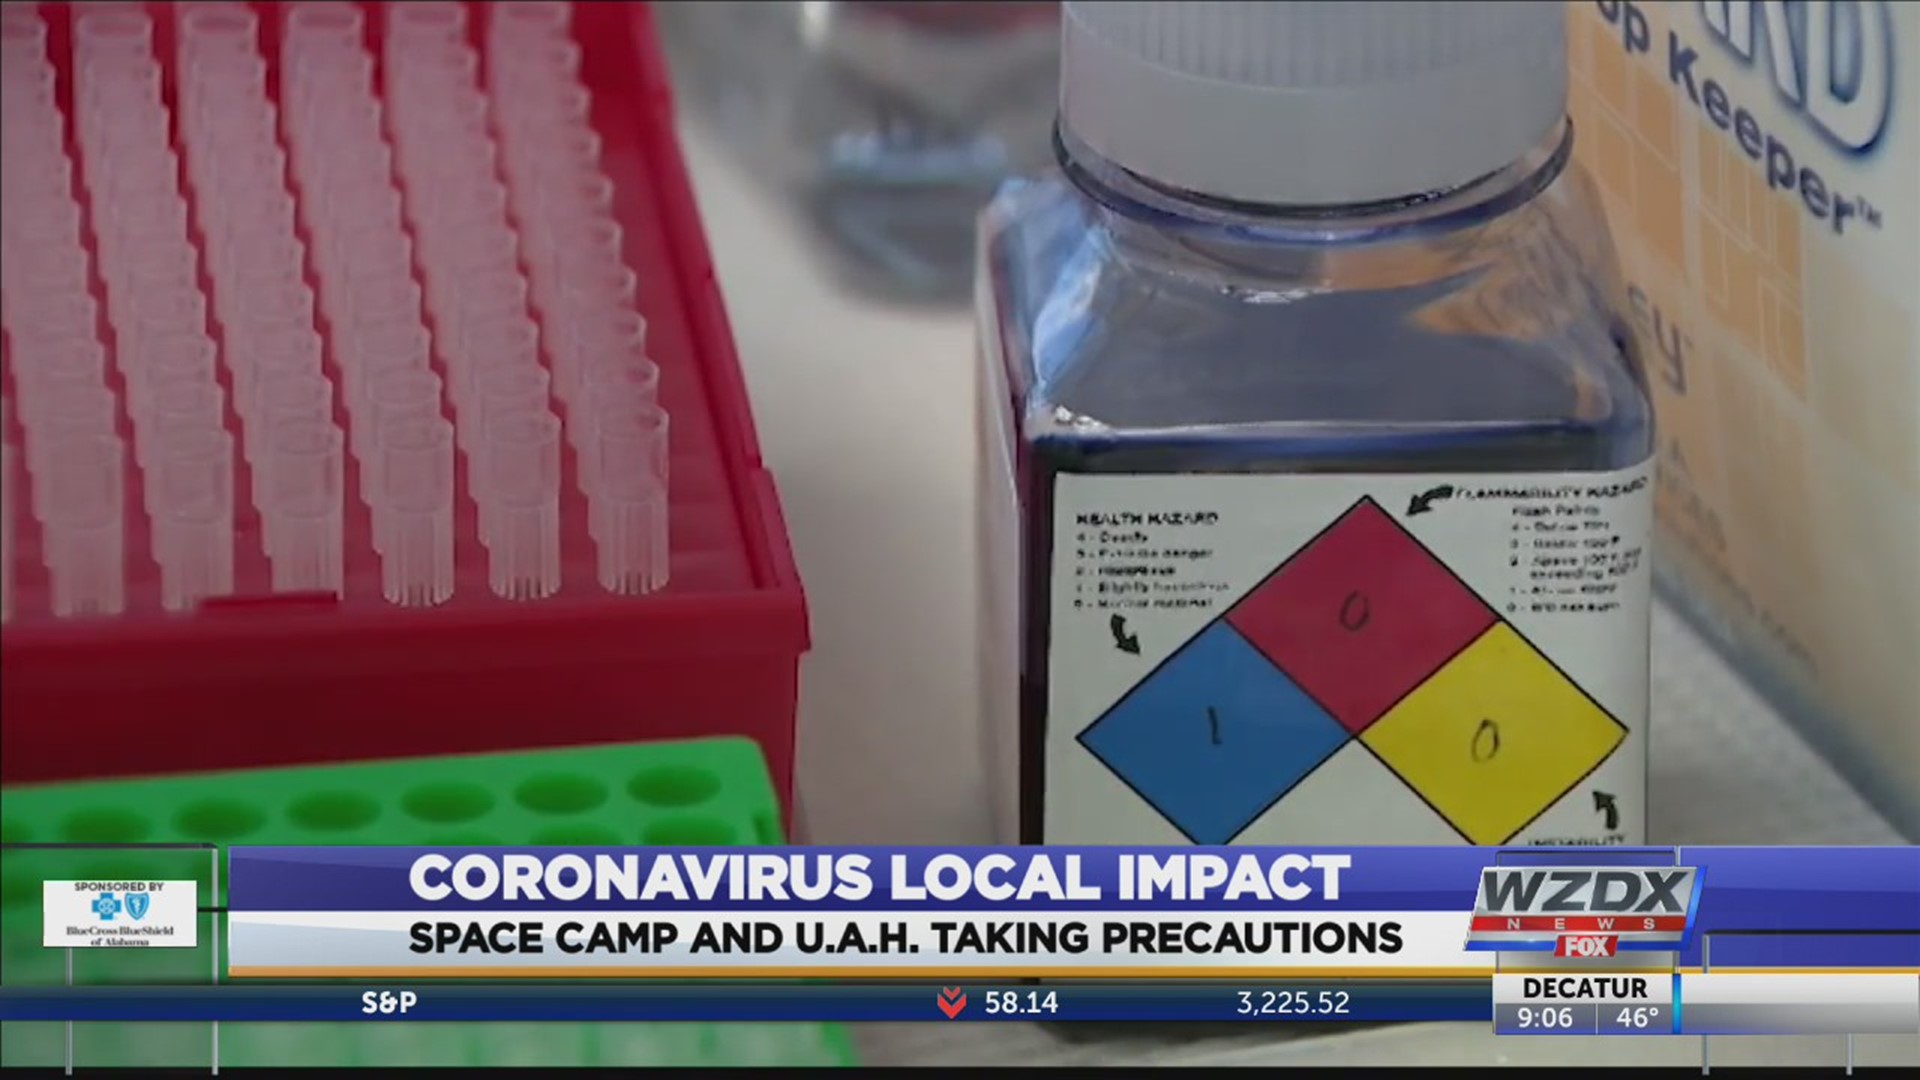 The coronavirus outbreak has now been declared a public health emergency and many are worried about public areas.